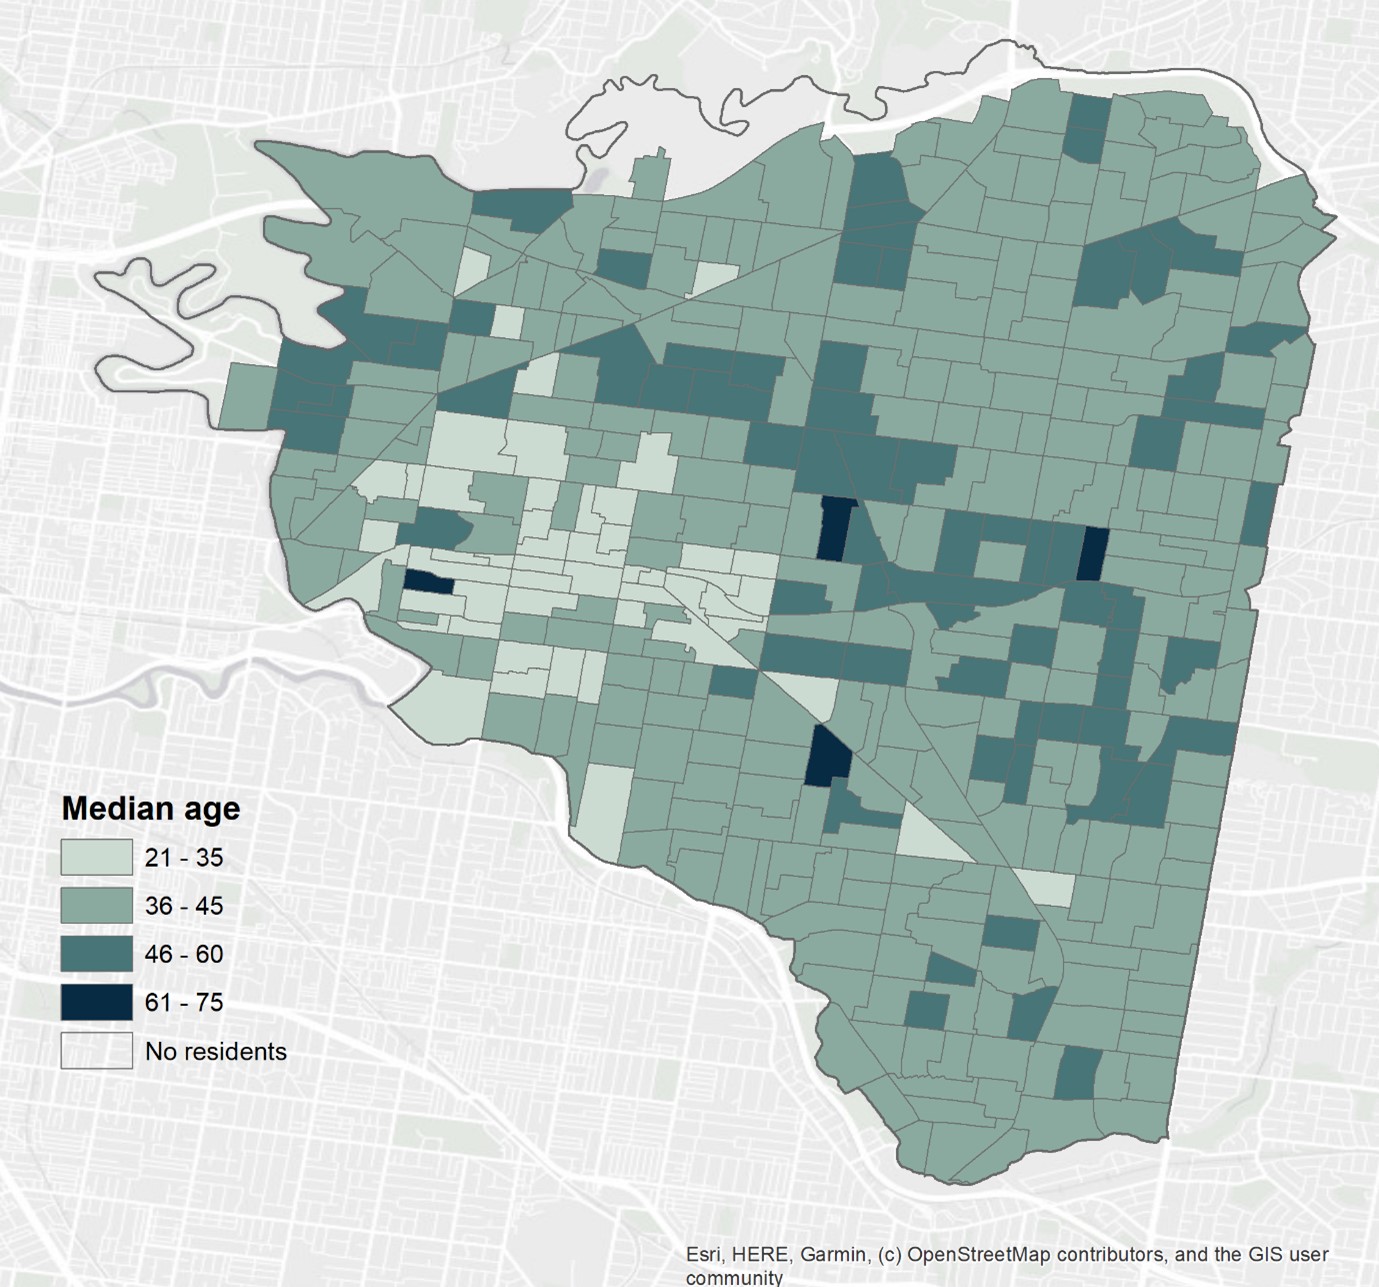 This map shows that most neighbourhoods have a median age of 36 to 45. Four neighbourhoods have a median age of 61 to 75 years while 51 neighbourhoods, mainly in Hawthorn and Hawthorn East, have a median age between 21 and 35.